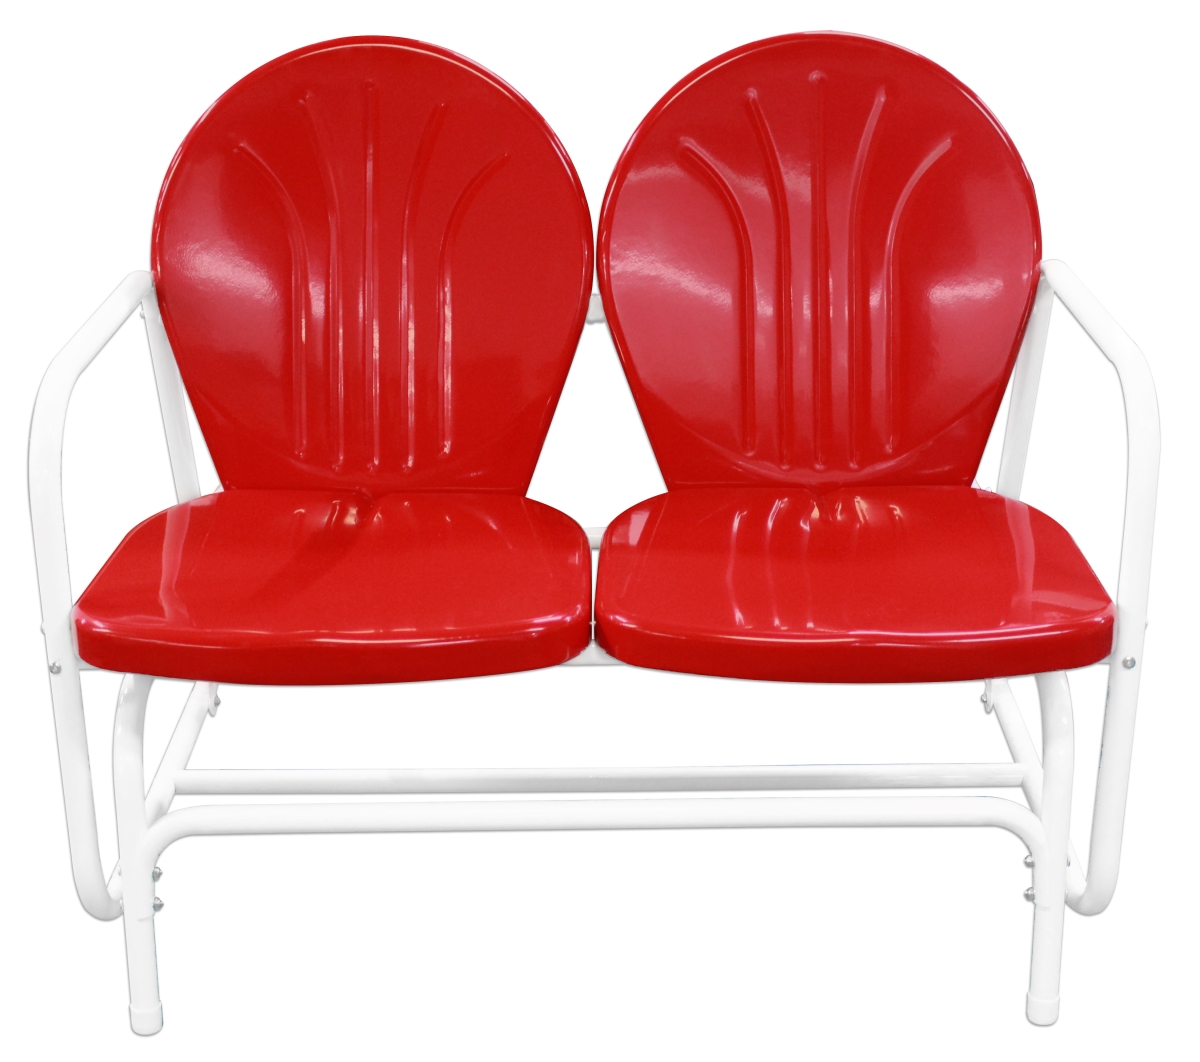 Picture of Leigh Country TX 93512 Leigh Country Retro Double Glider Red & White